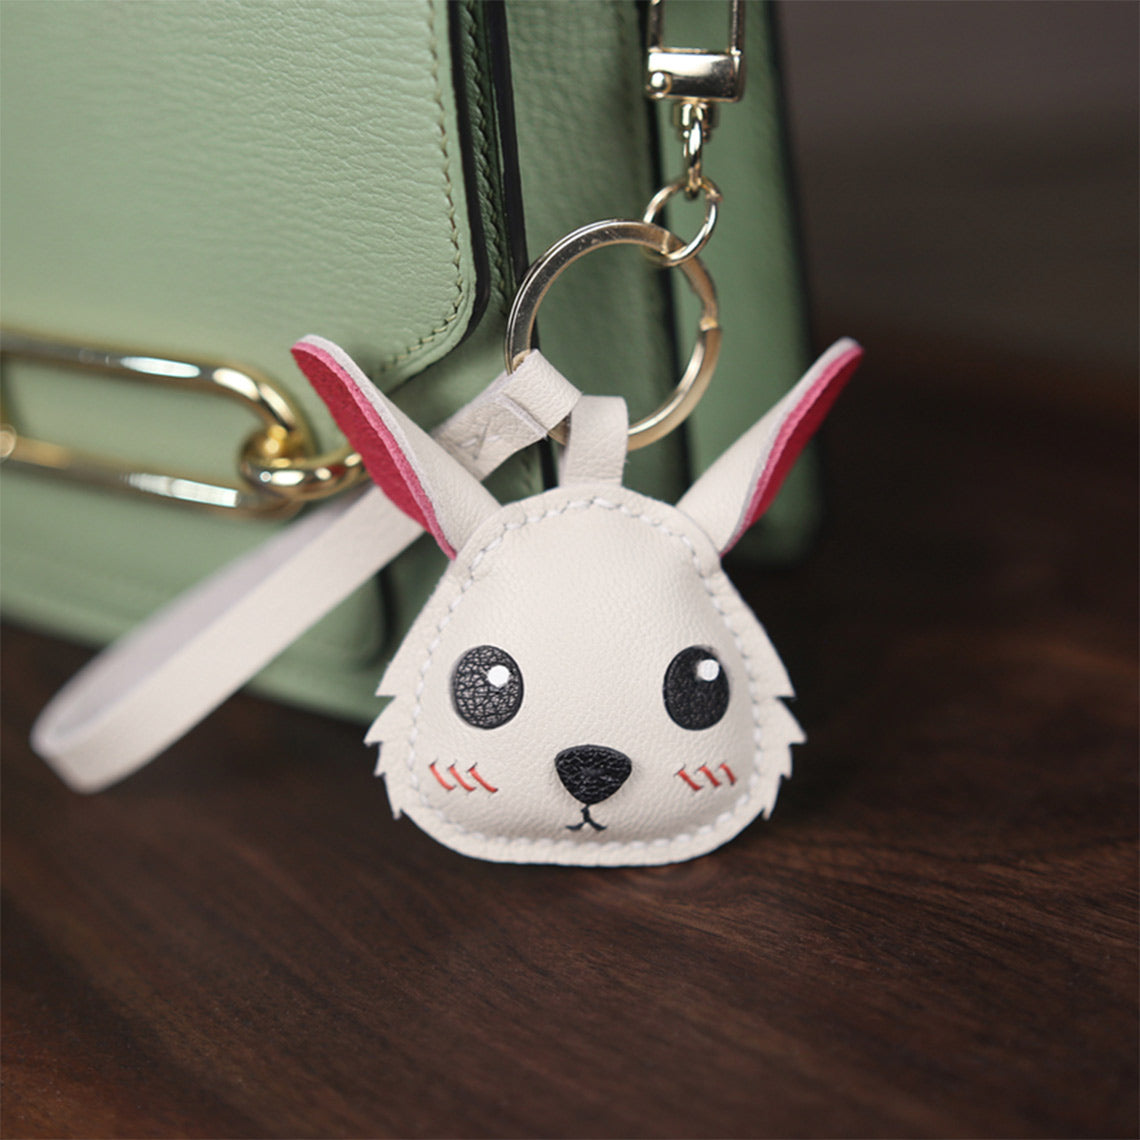 Cute Rabbit Bunny Leather Keychain Charm | White Rabbit Pendant, Bag Charm for Rabbit Lovers - POPSEWING™ 